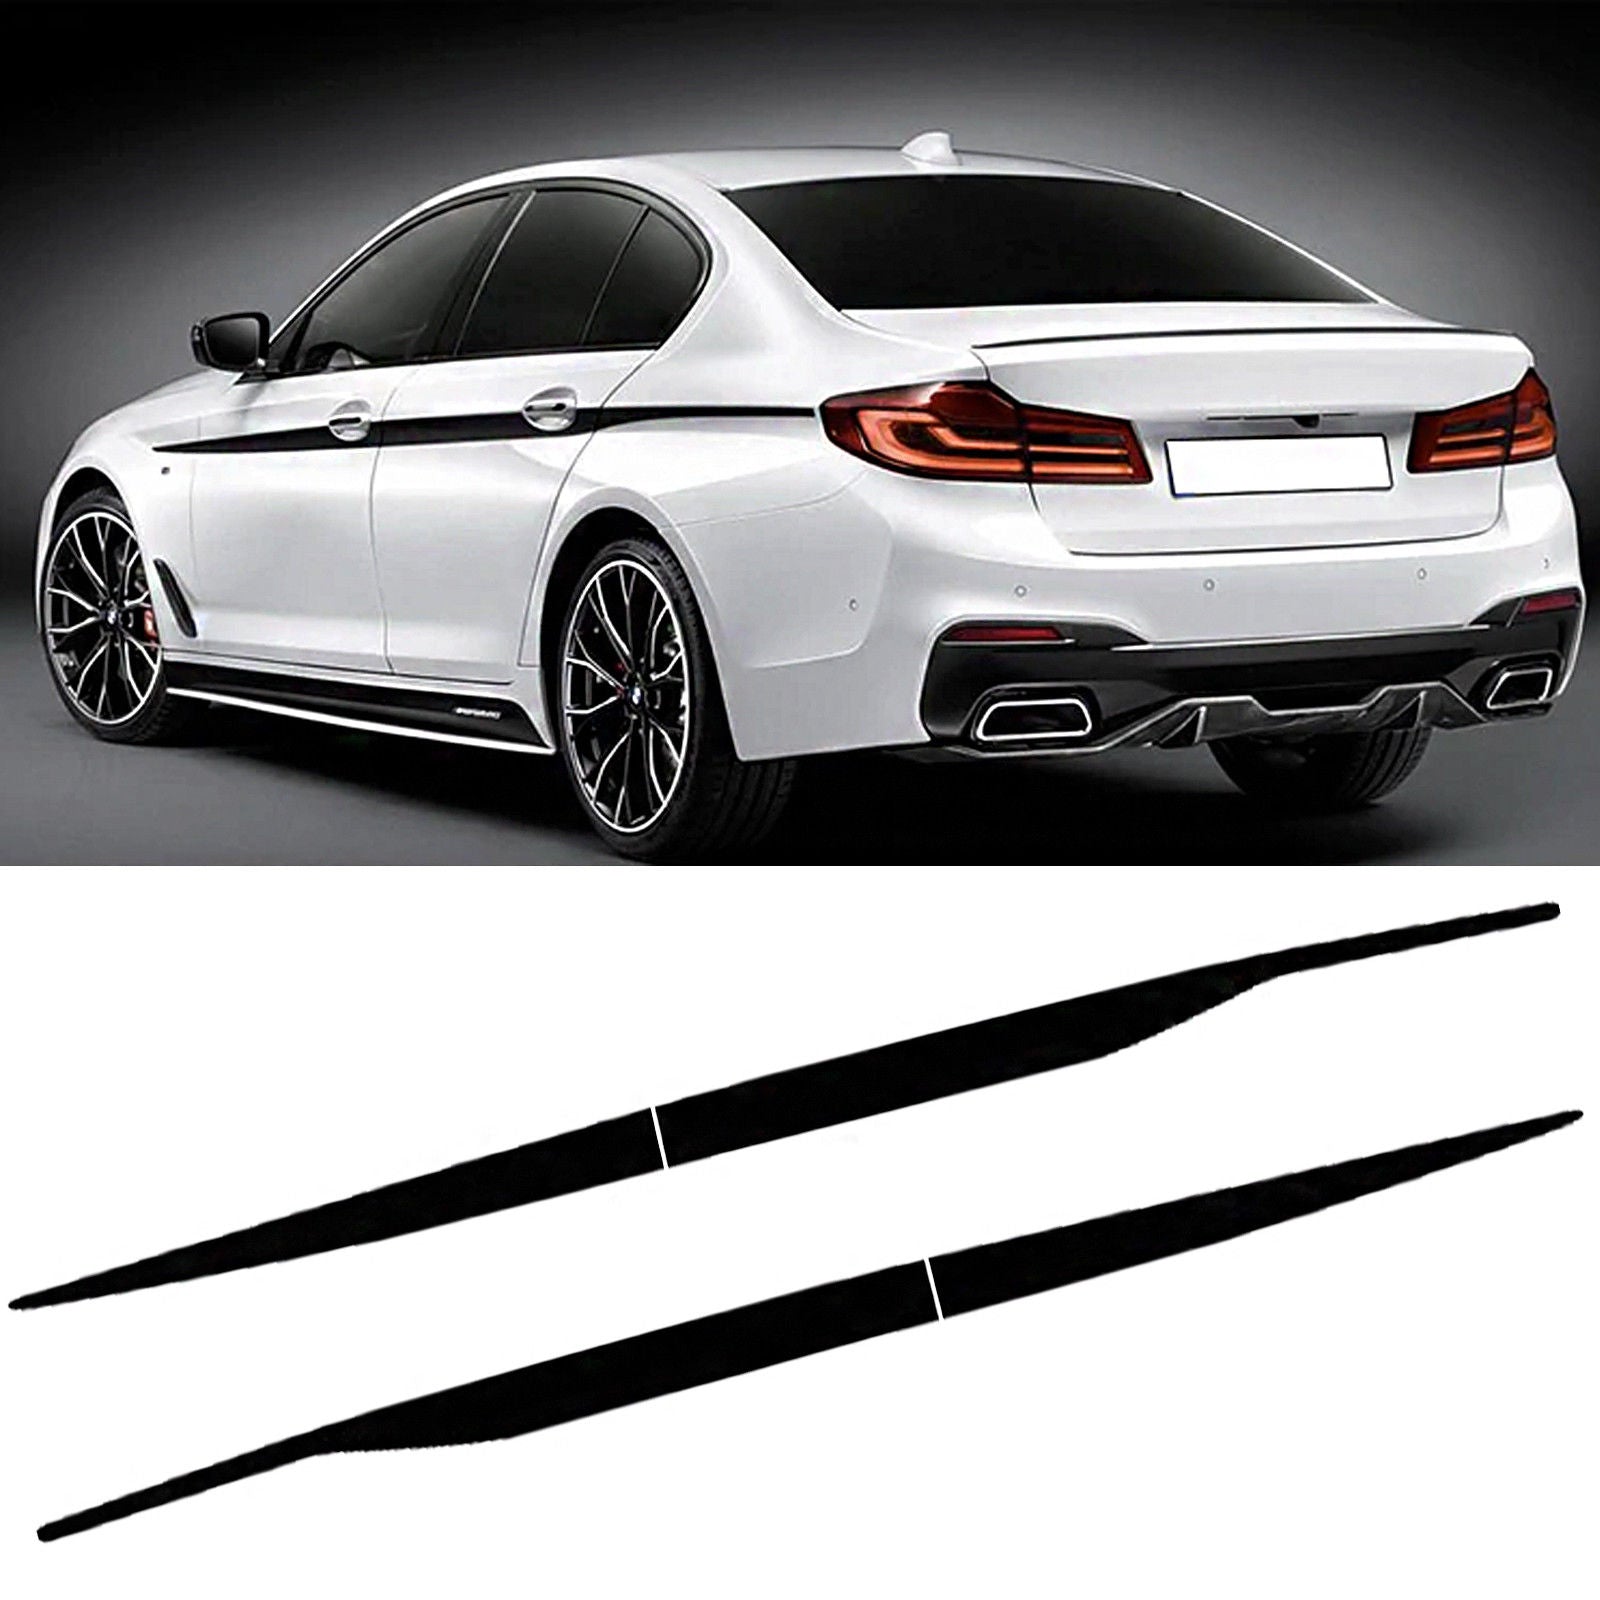  Duoles New Car Sports Styling Racing Decoration Performance  Rear View Mirror Stickers Front Decal Styling For BMW M3 M5 X1 X3 X5 X6 E36  E39 E46 E30 E60 E92 (Black Rear